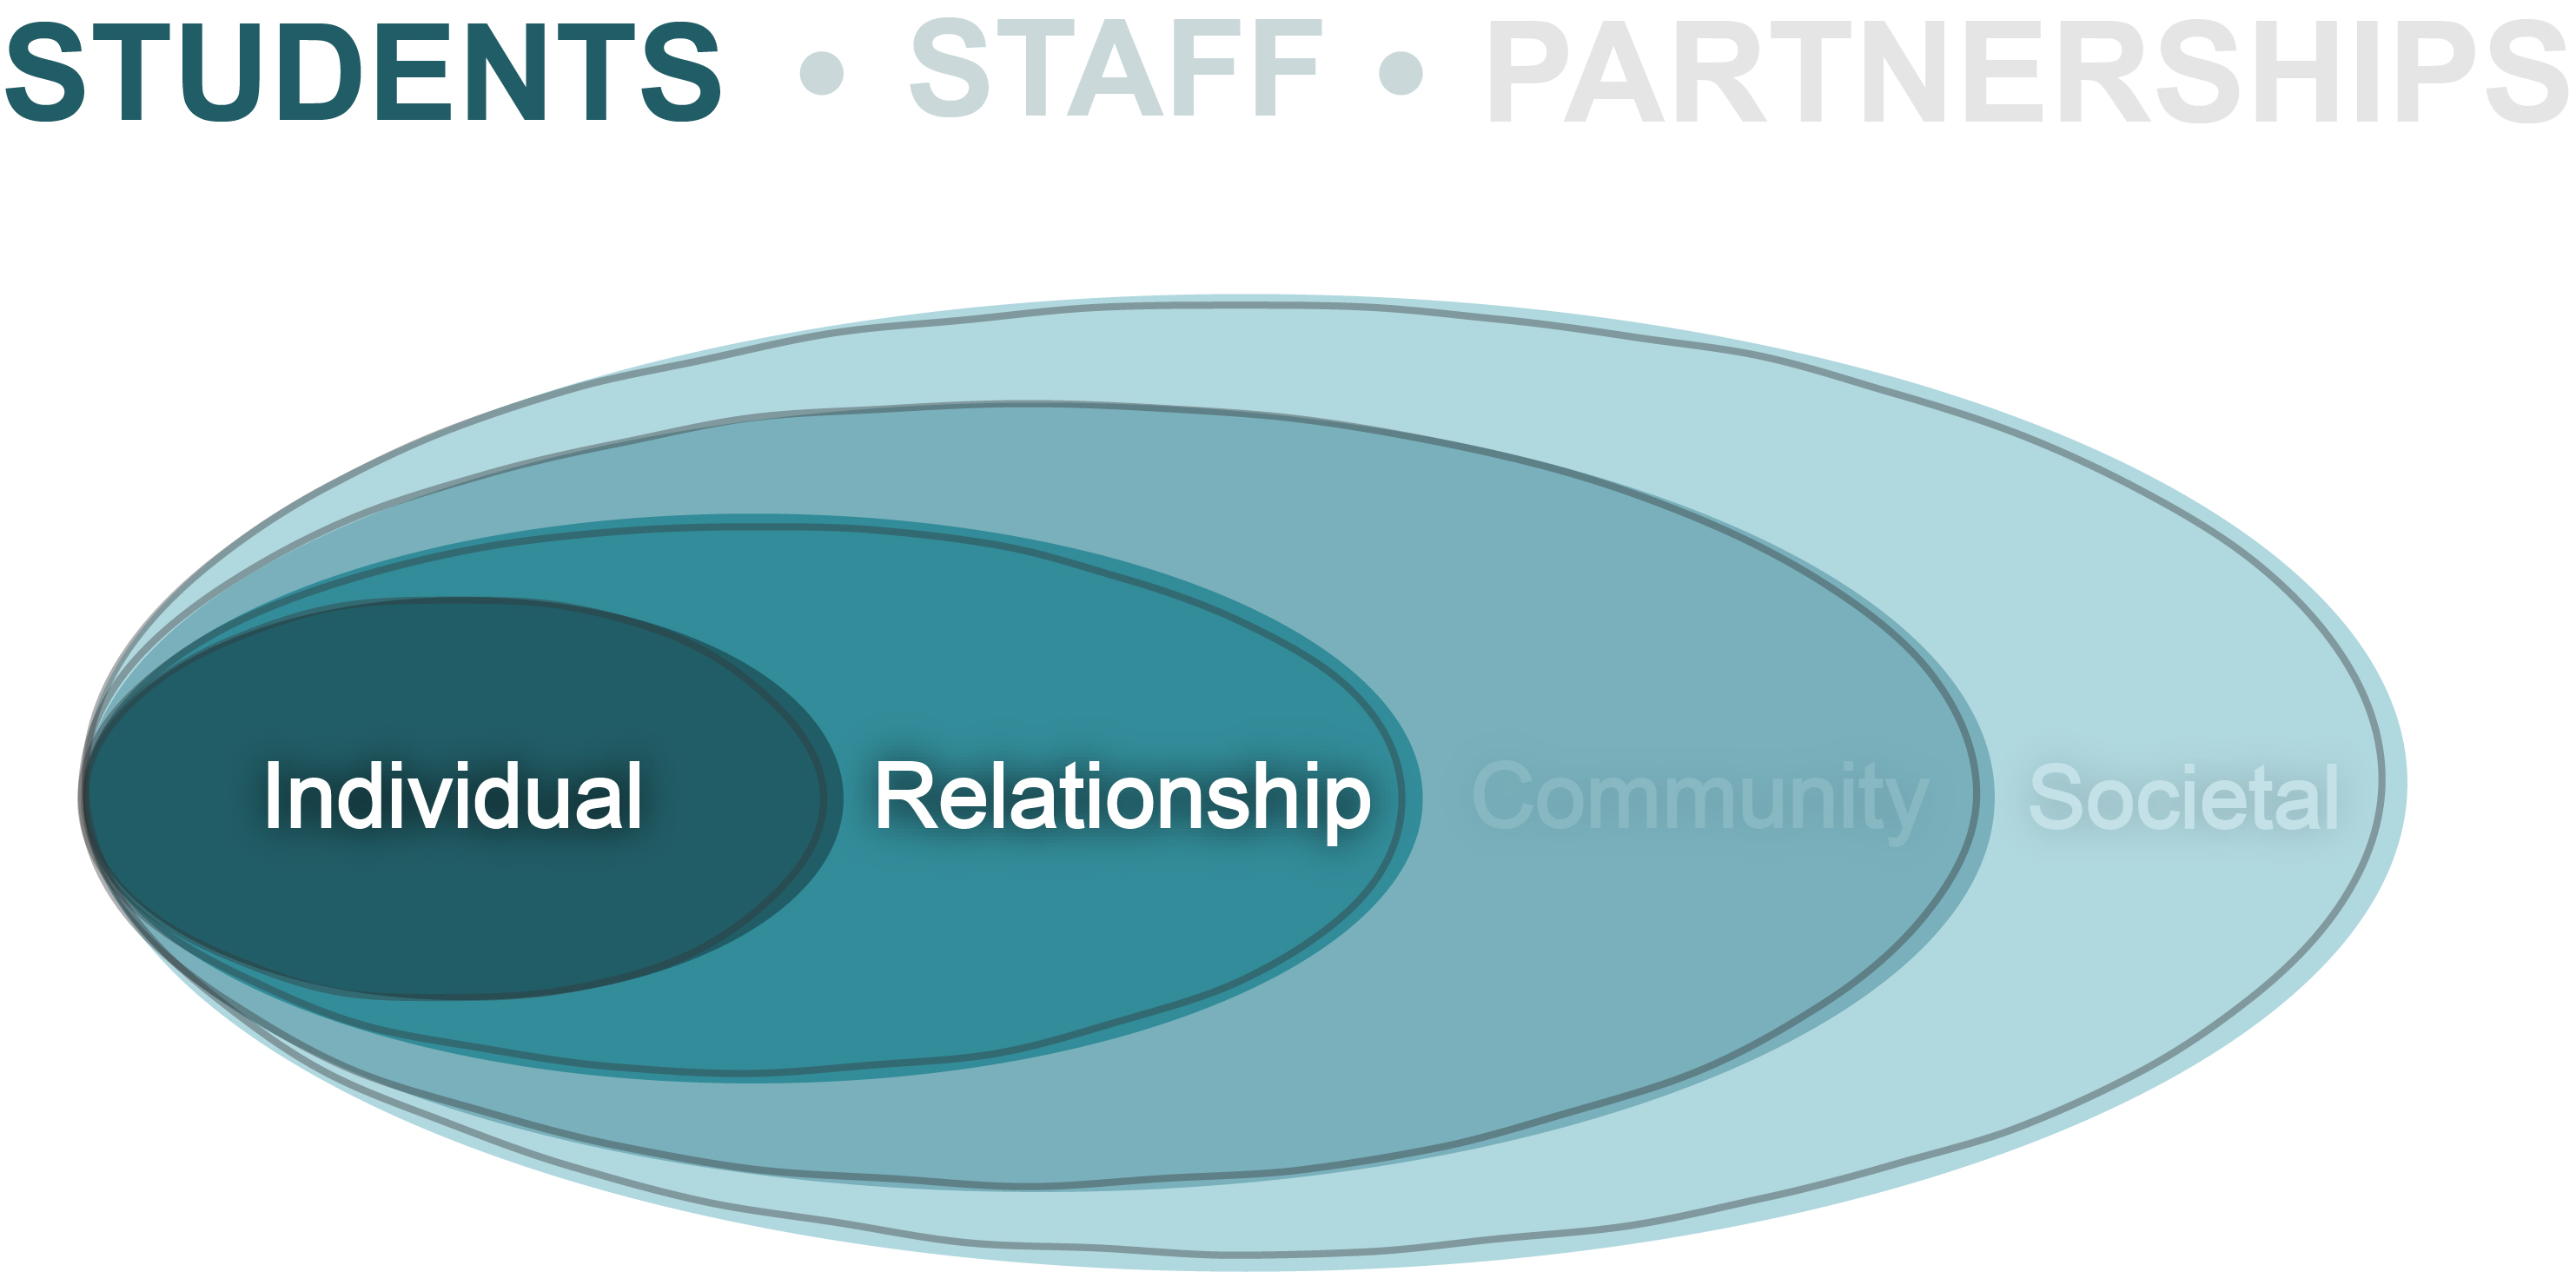 The word "Students" and the two smallest ovals "Individual" & "Relationship" are highlighted in the Socioecological Model graphic.